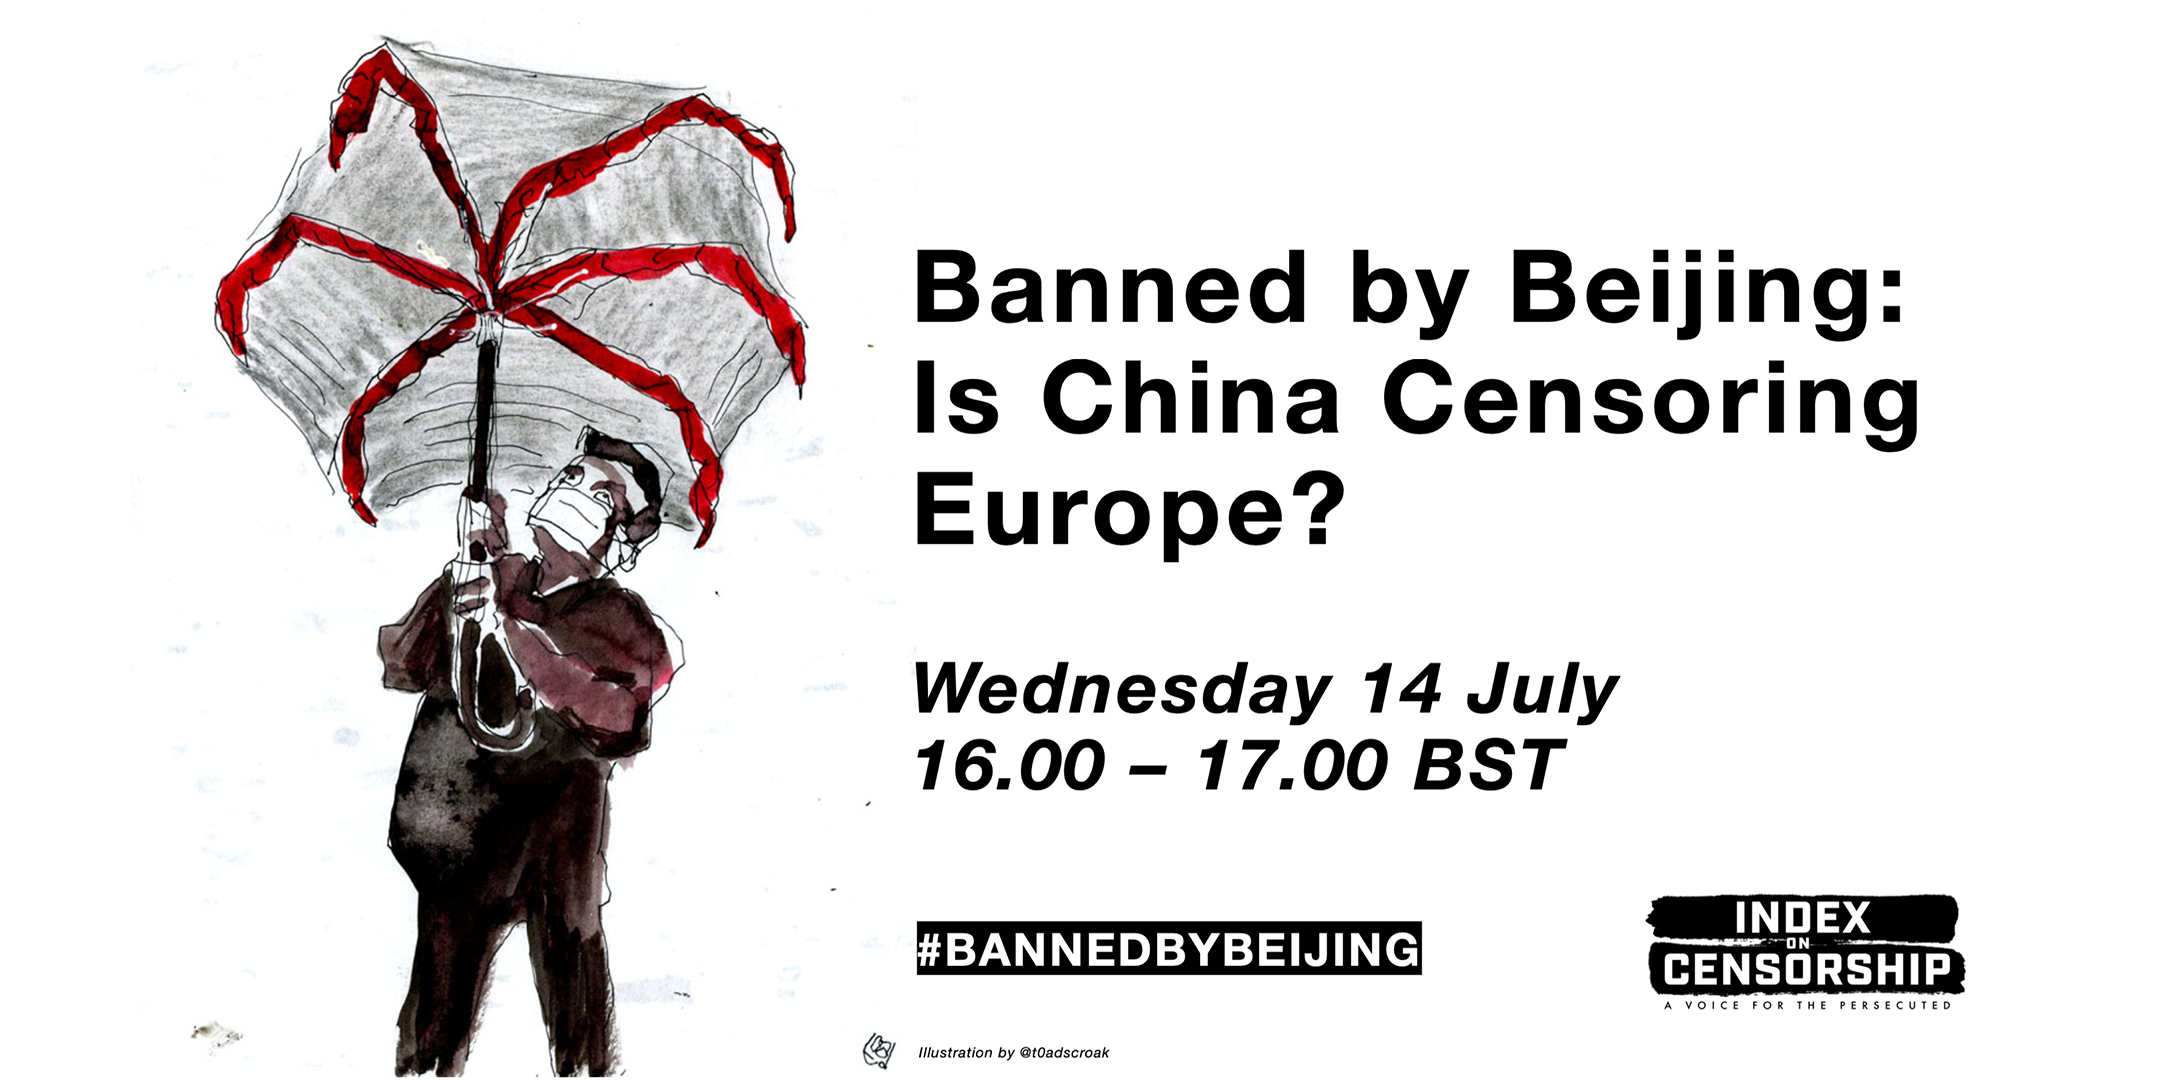 Banned by Beijing: Is China Censoring Europe?